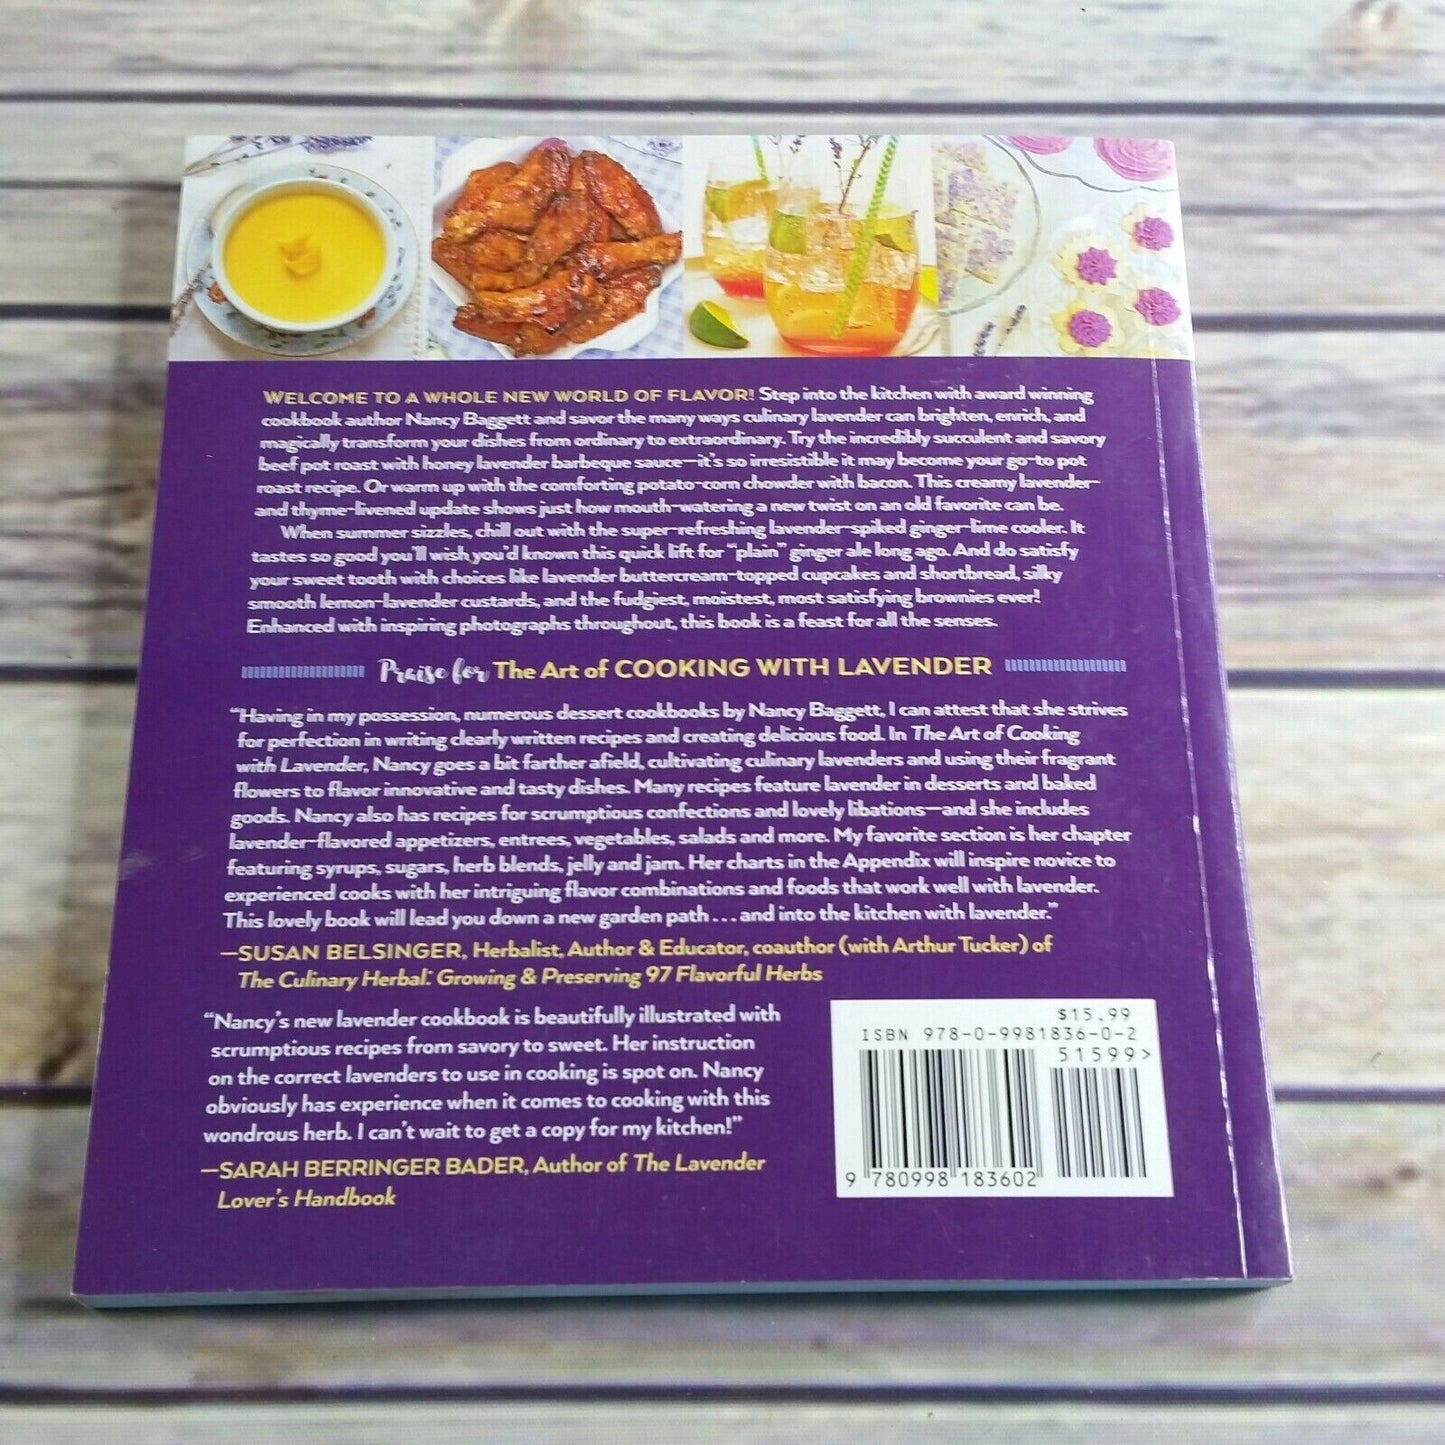 The Art of Cooking with Lavender - Paperback By Nancy Baggett - VERY GOOD